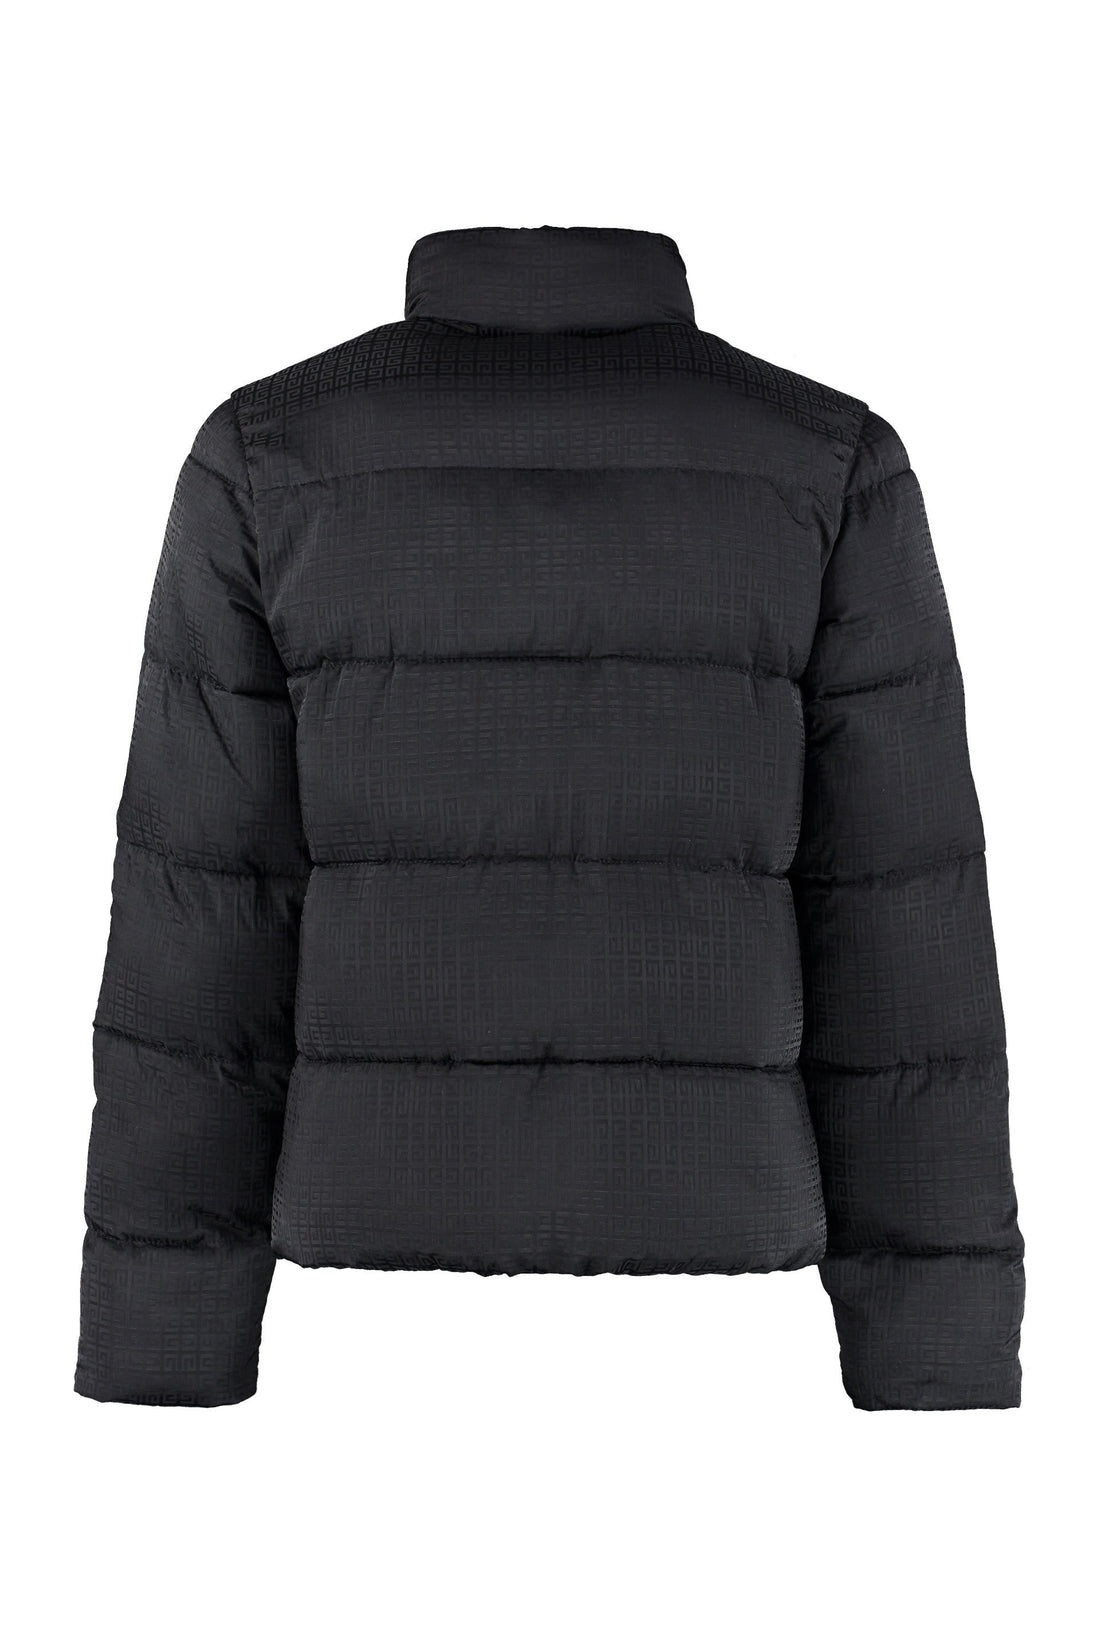 Givenchy-OUTLET-SALE-Down jacket with all-over logo-ARCHIVIST